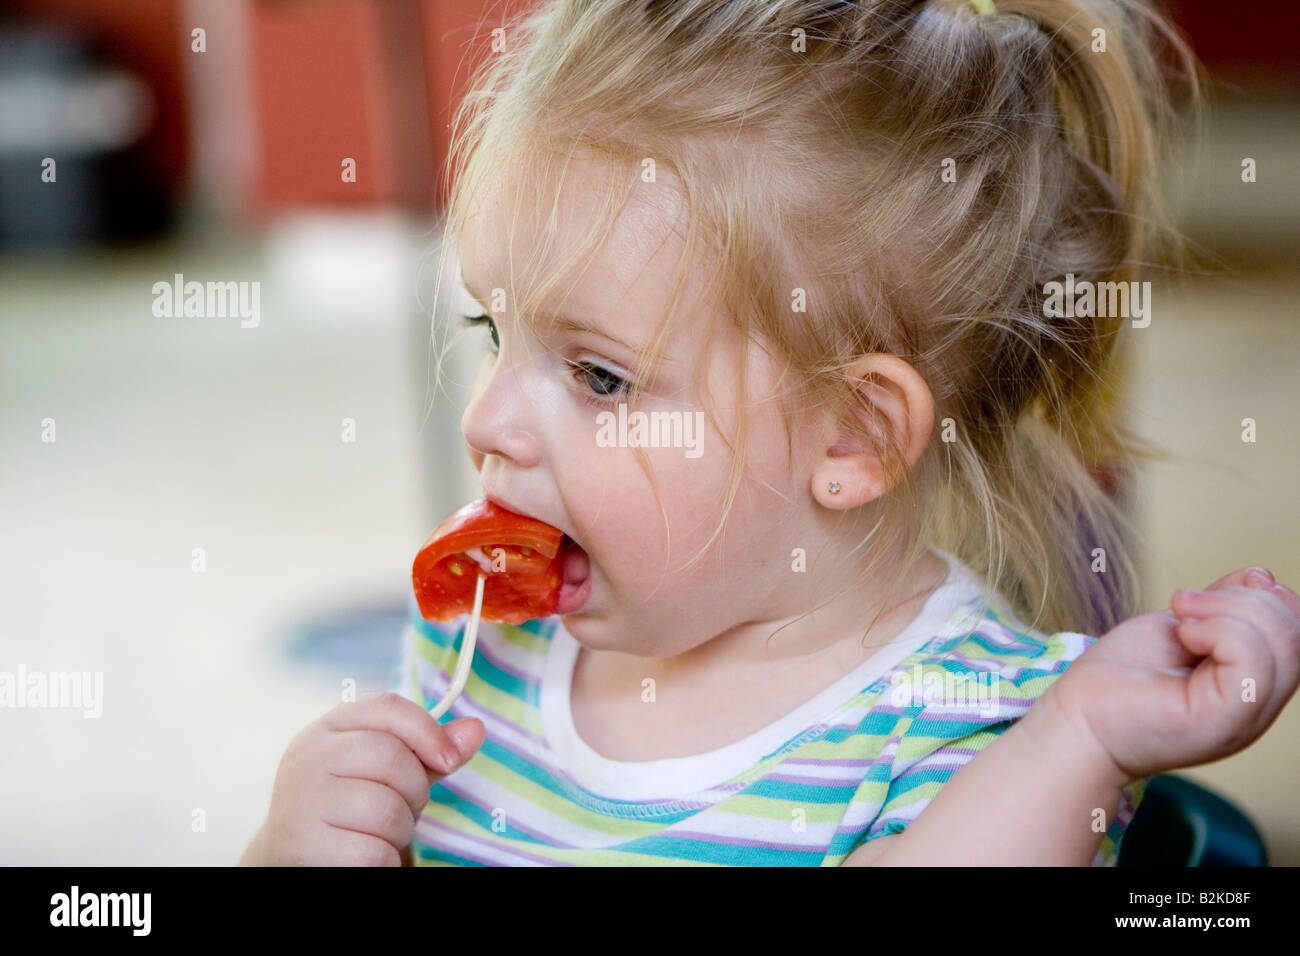 Female Toddler Eating a Tomato on a Fork Stock Photo